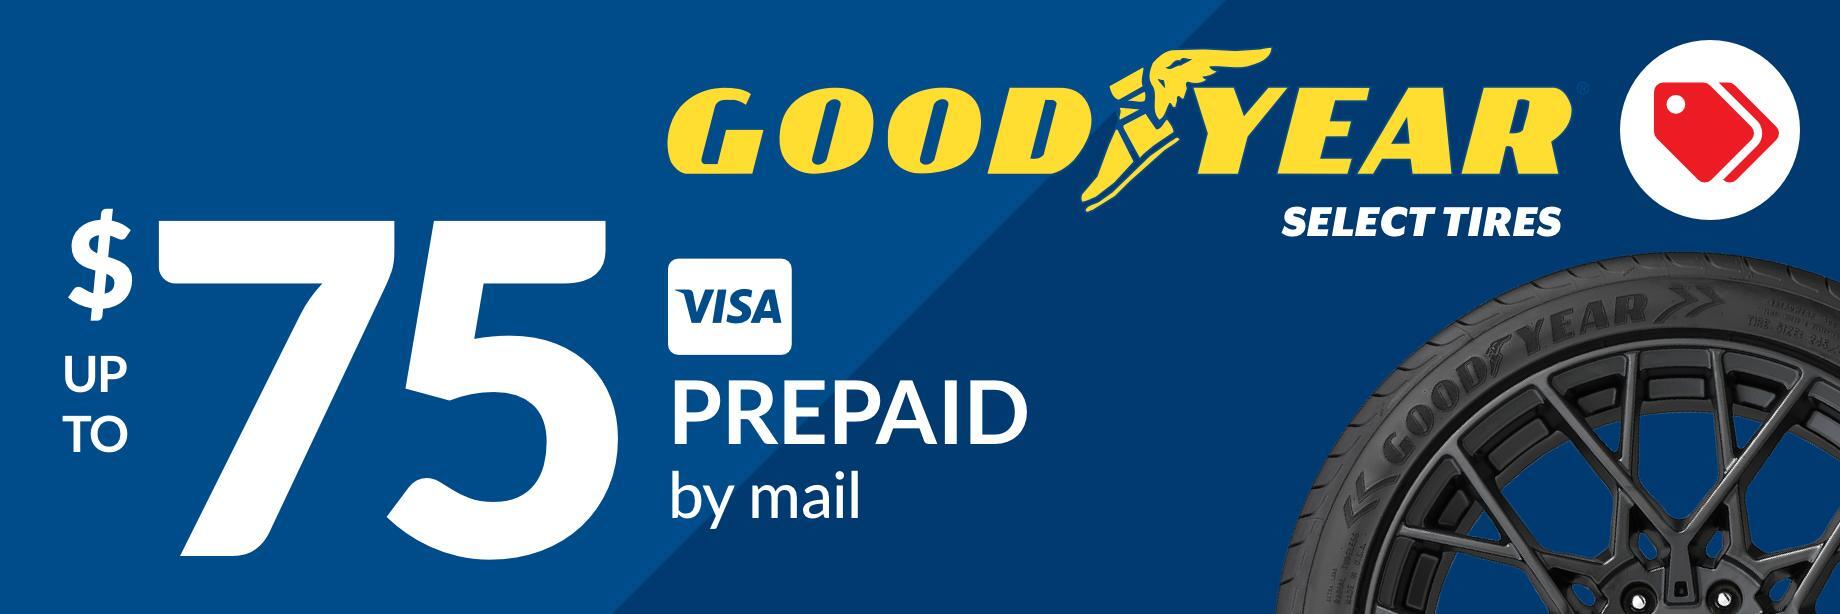 Goodyear tire rebate for may 2021 with Discount Tire Direct